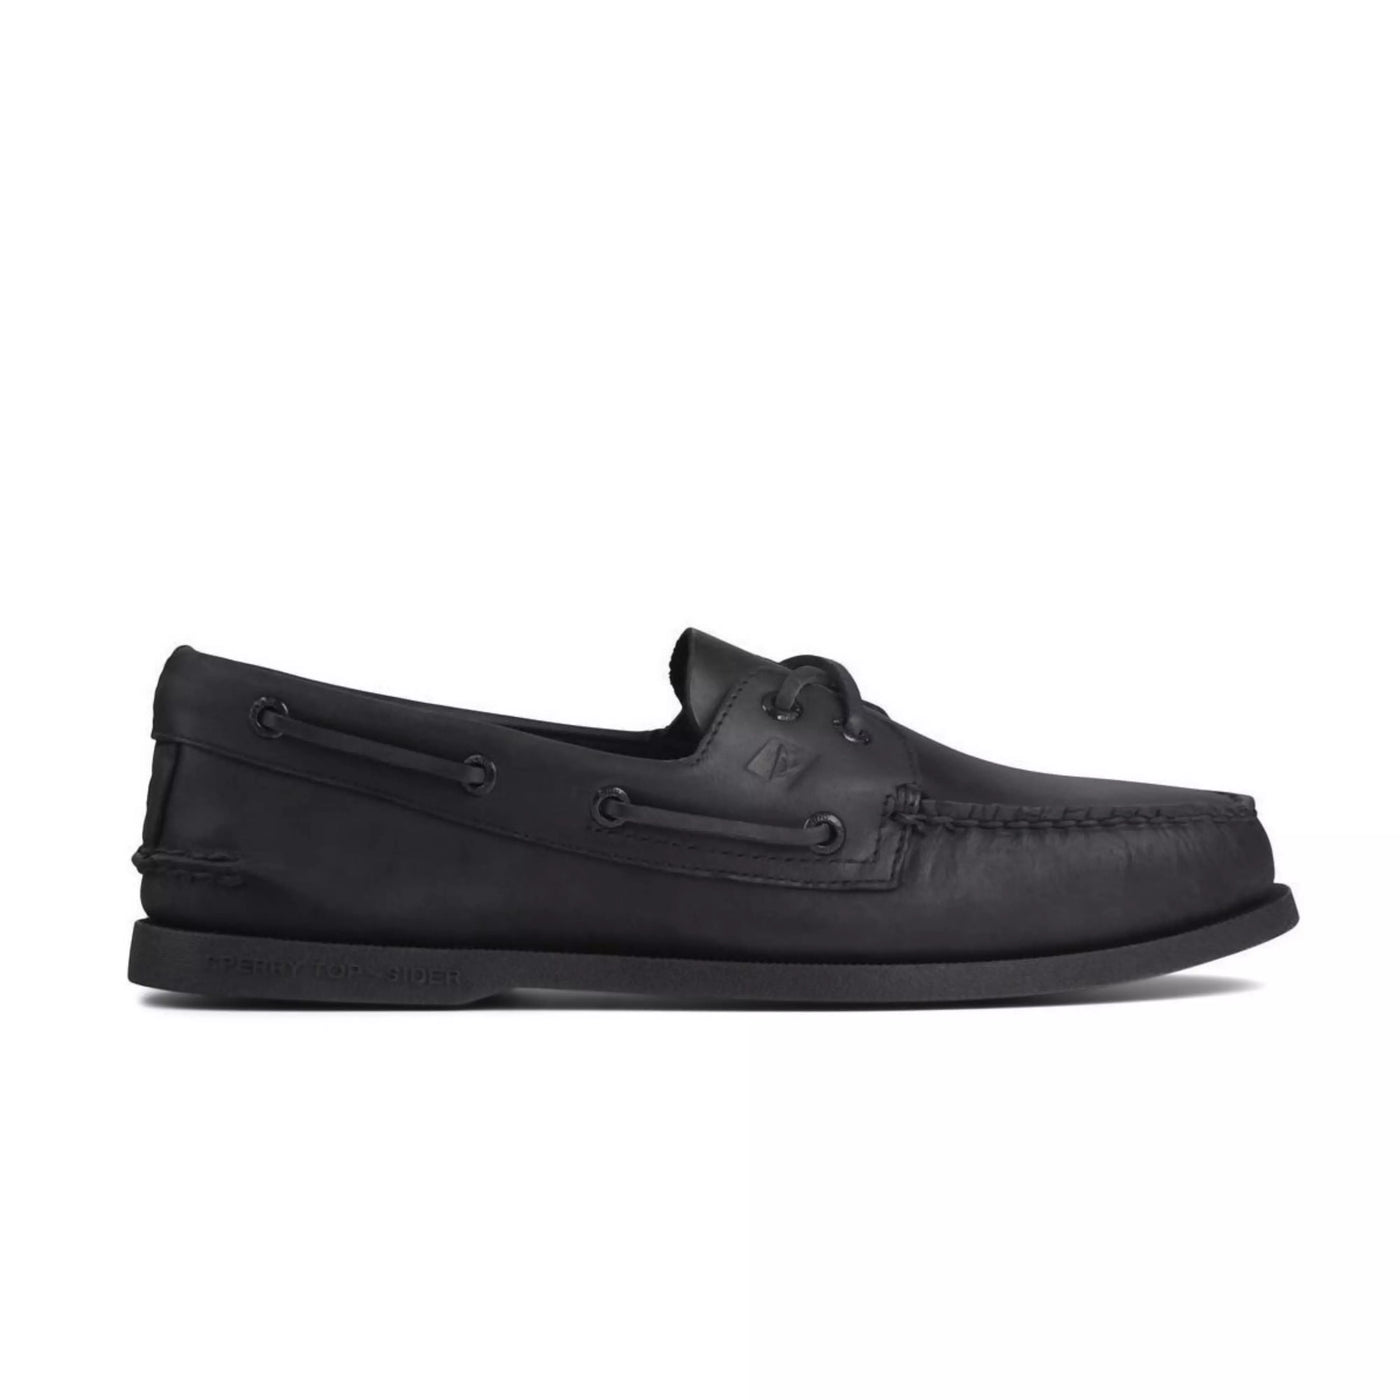 Black Authentic Original Leather Boat Shoe - Sperry - The Slipper Box